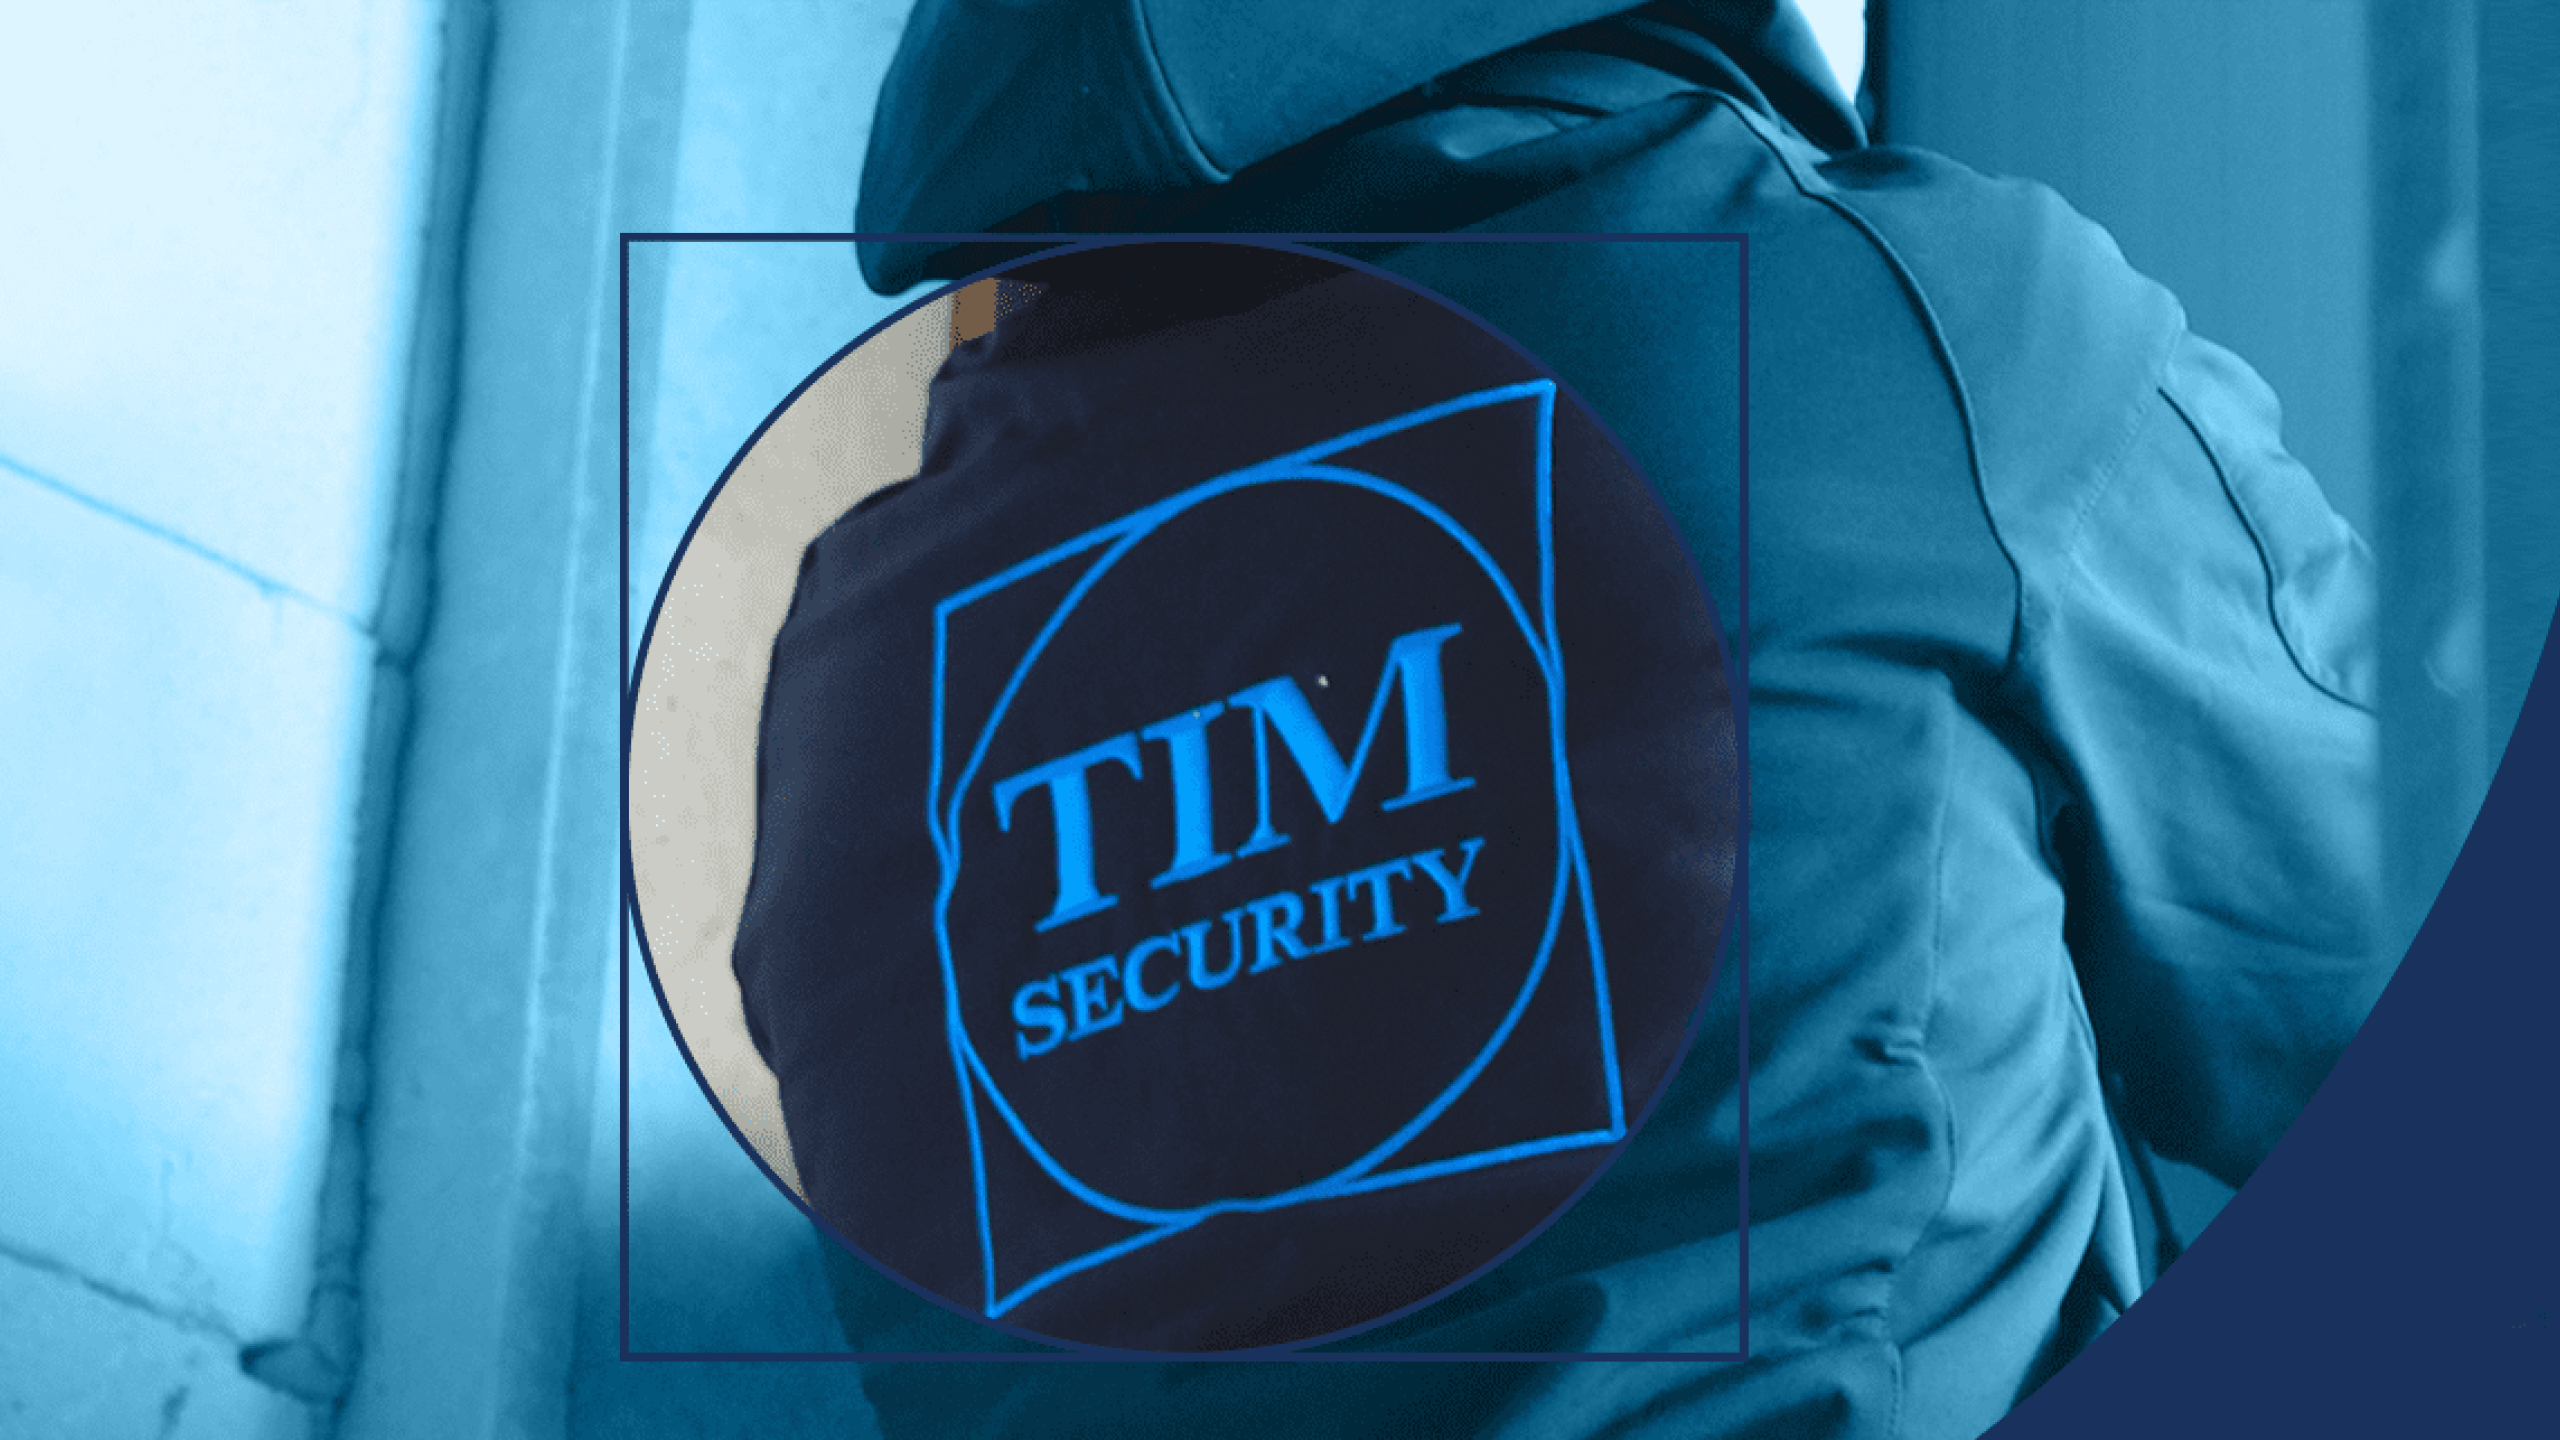 Tim security over ons